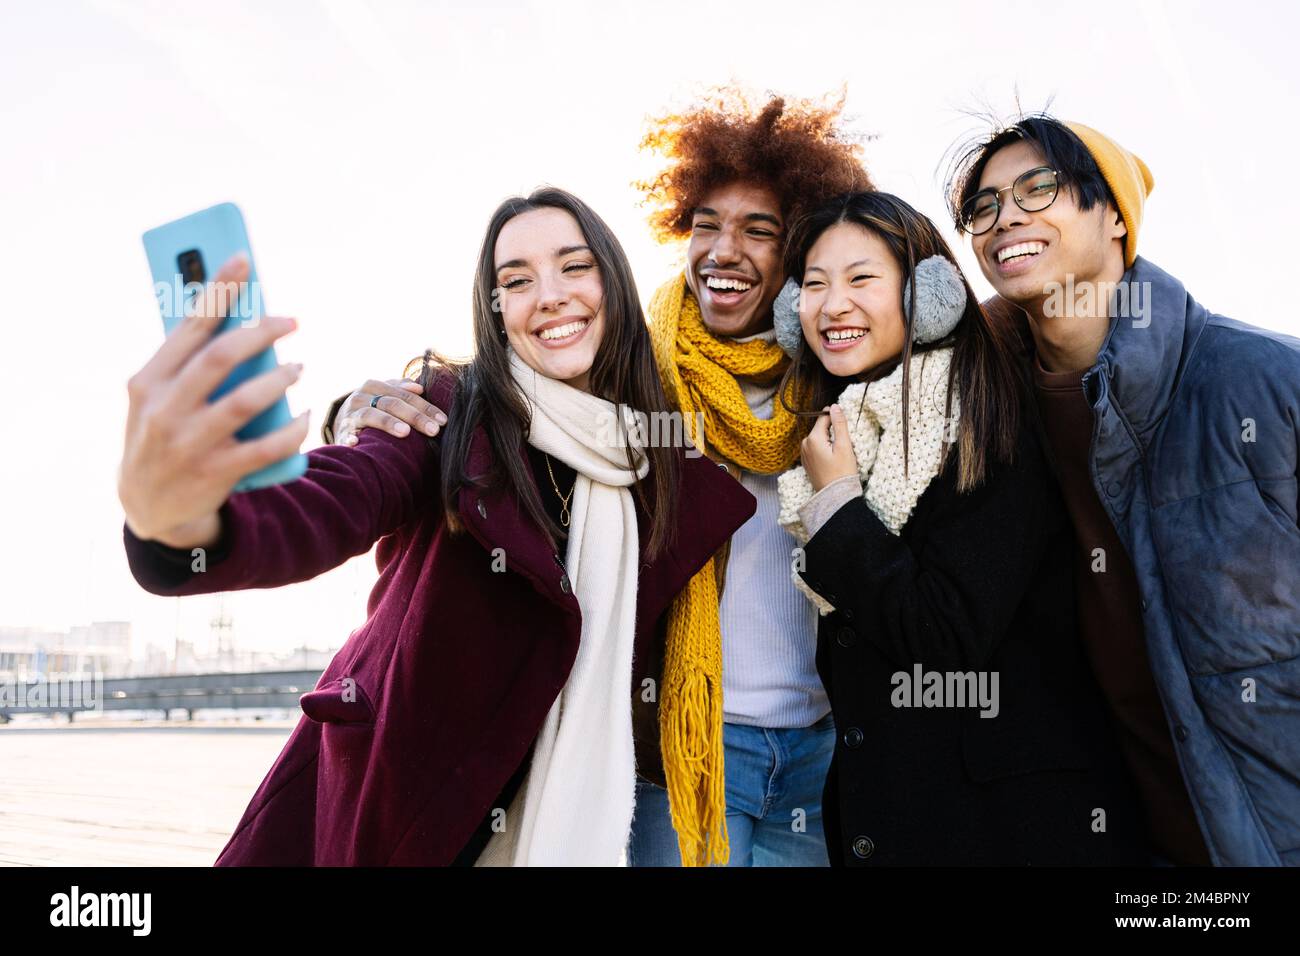 Young happy group of teenage friends taking a selfie portrait on winter day Stock Photo